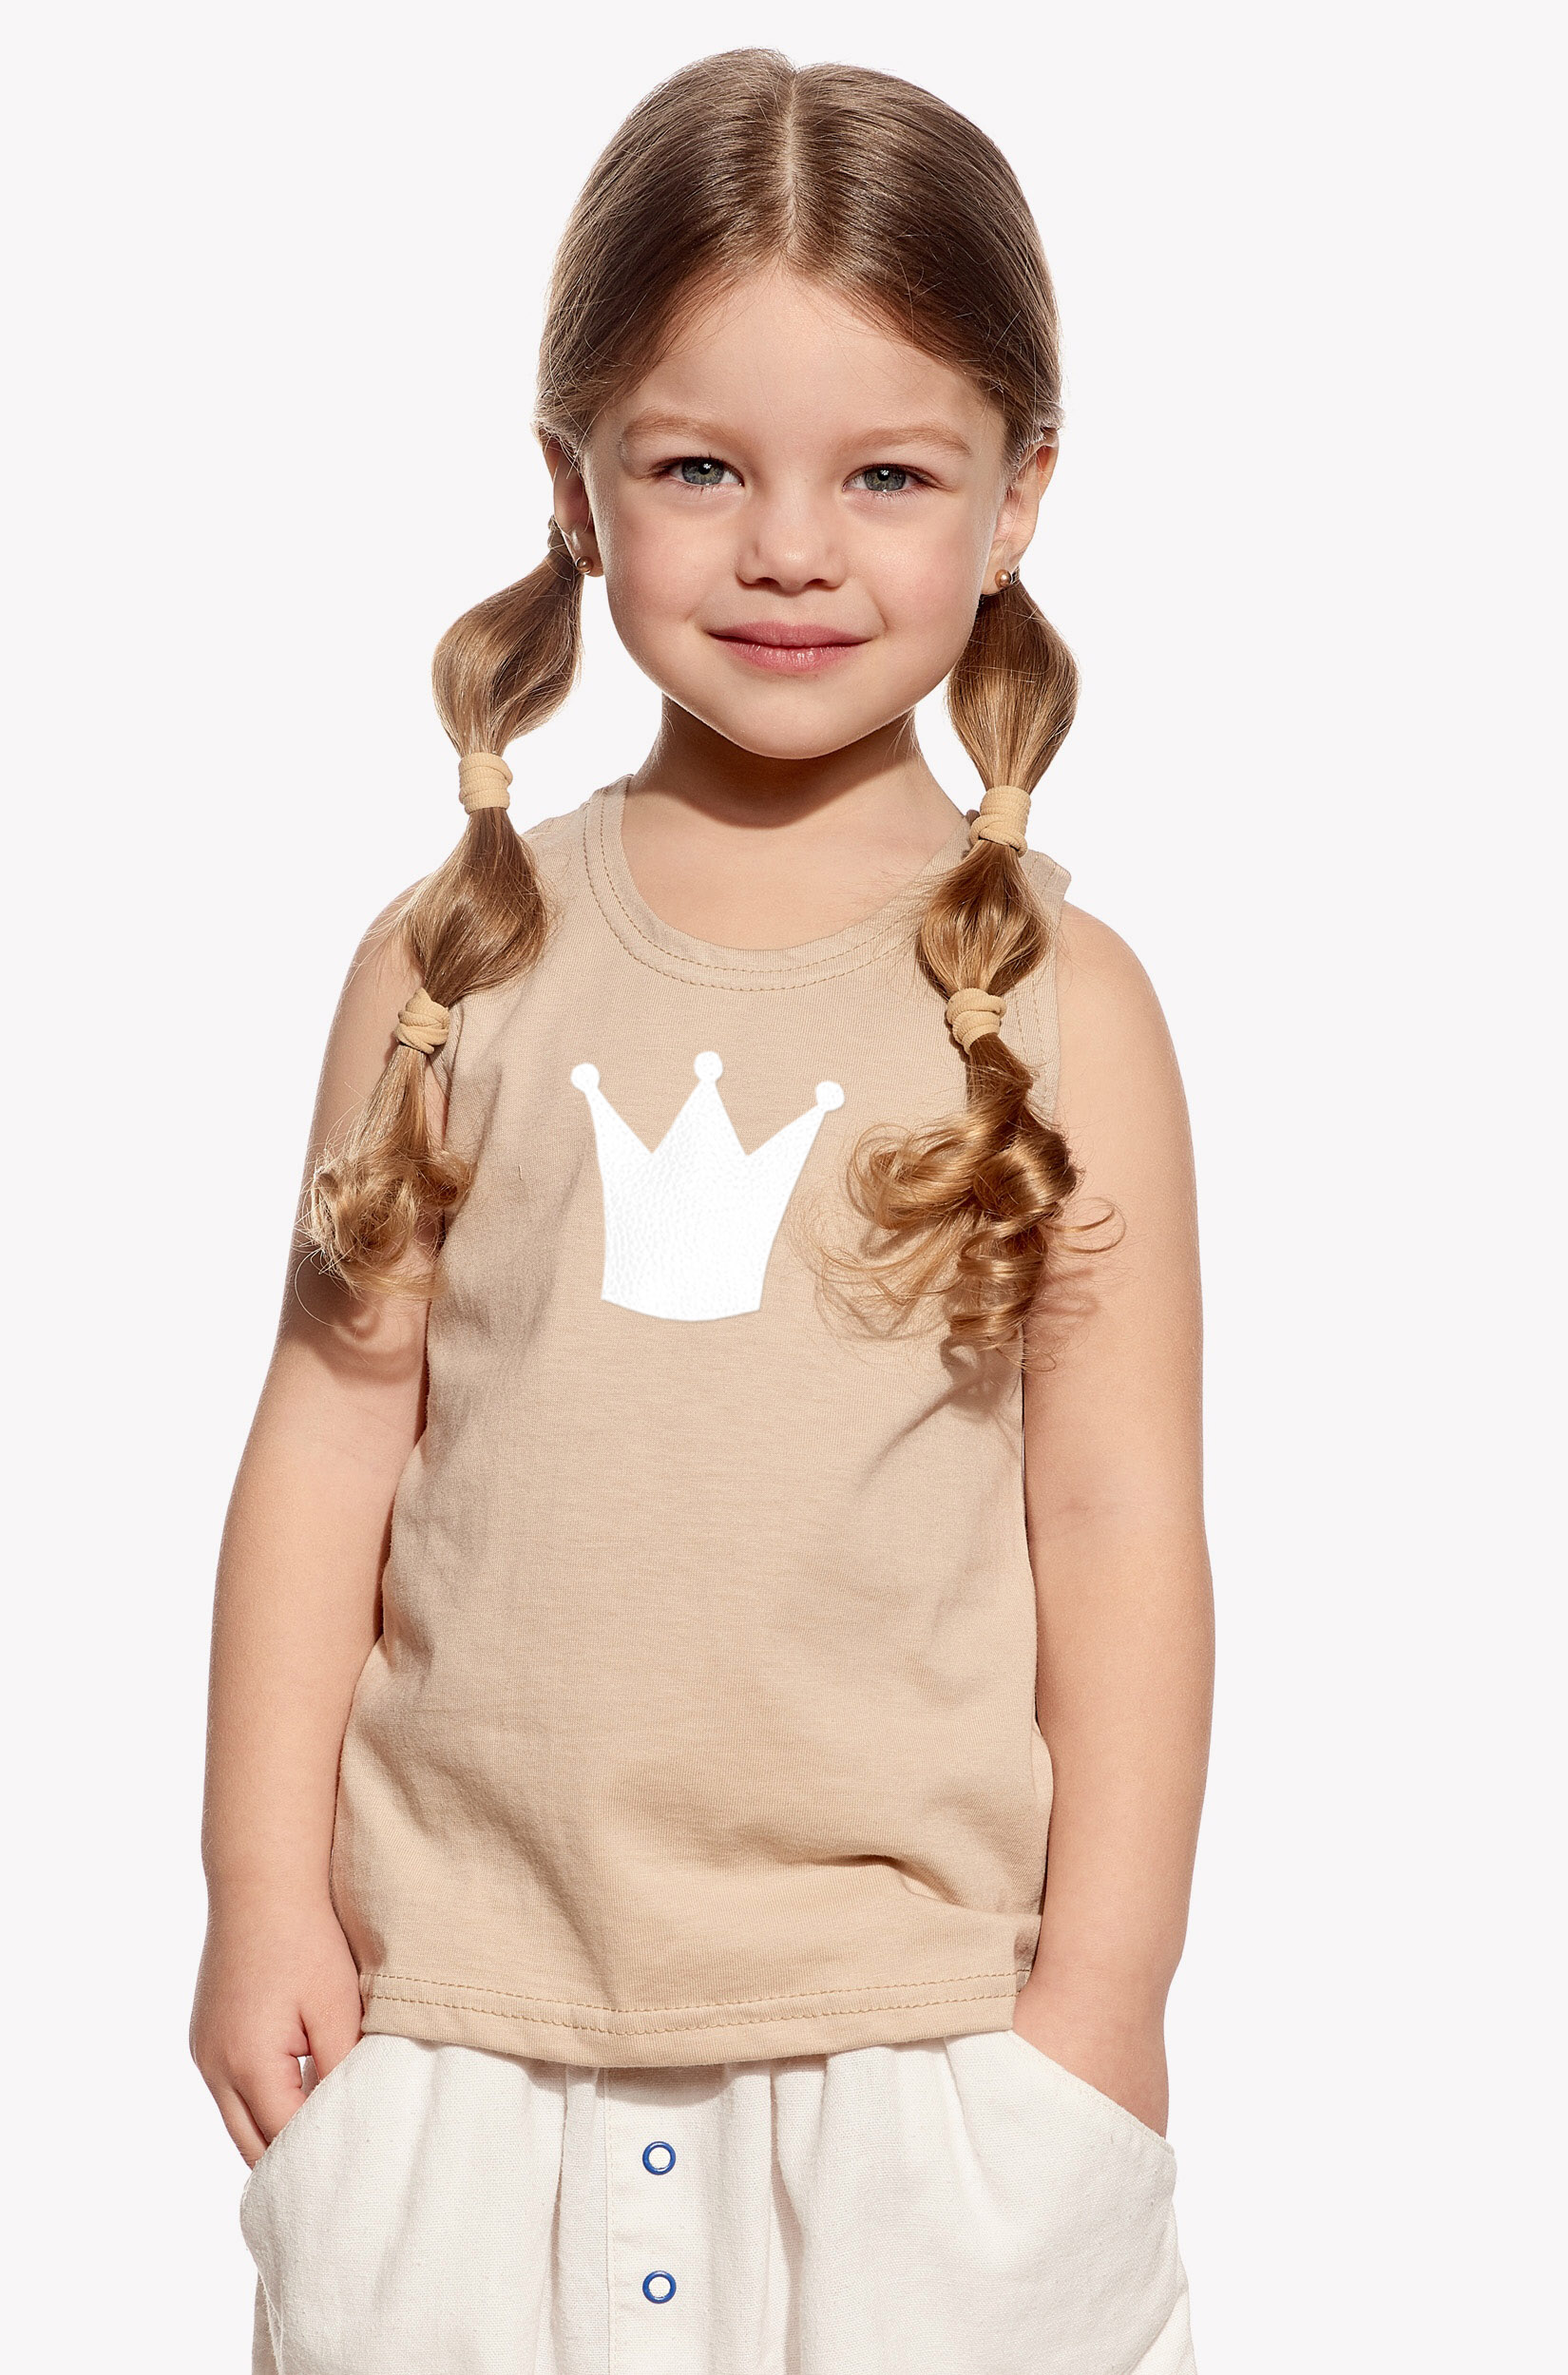 Singlet with crown